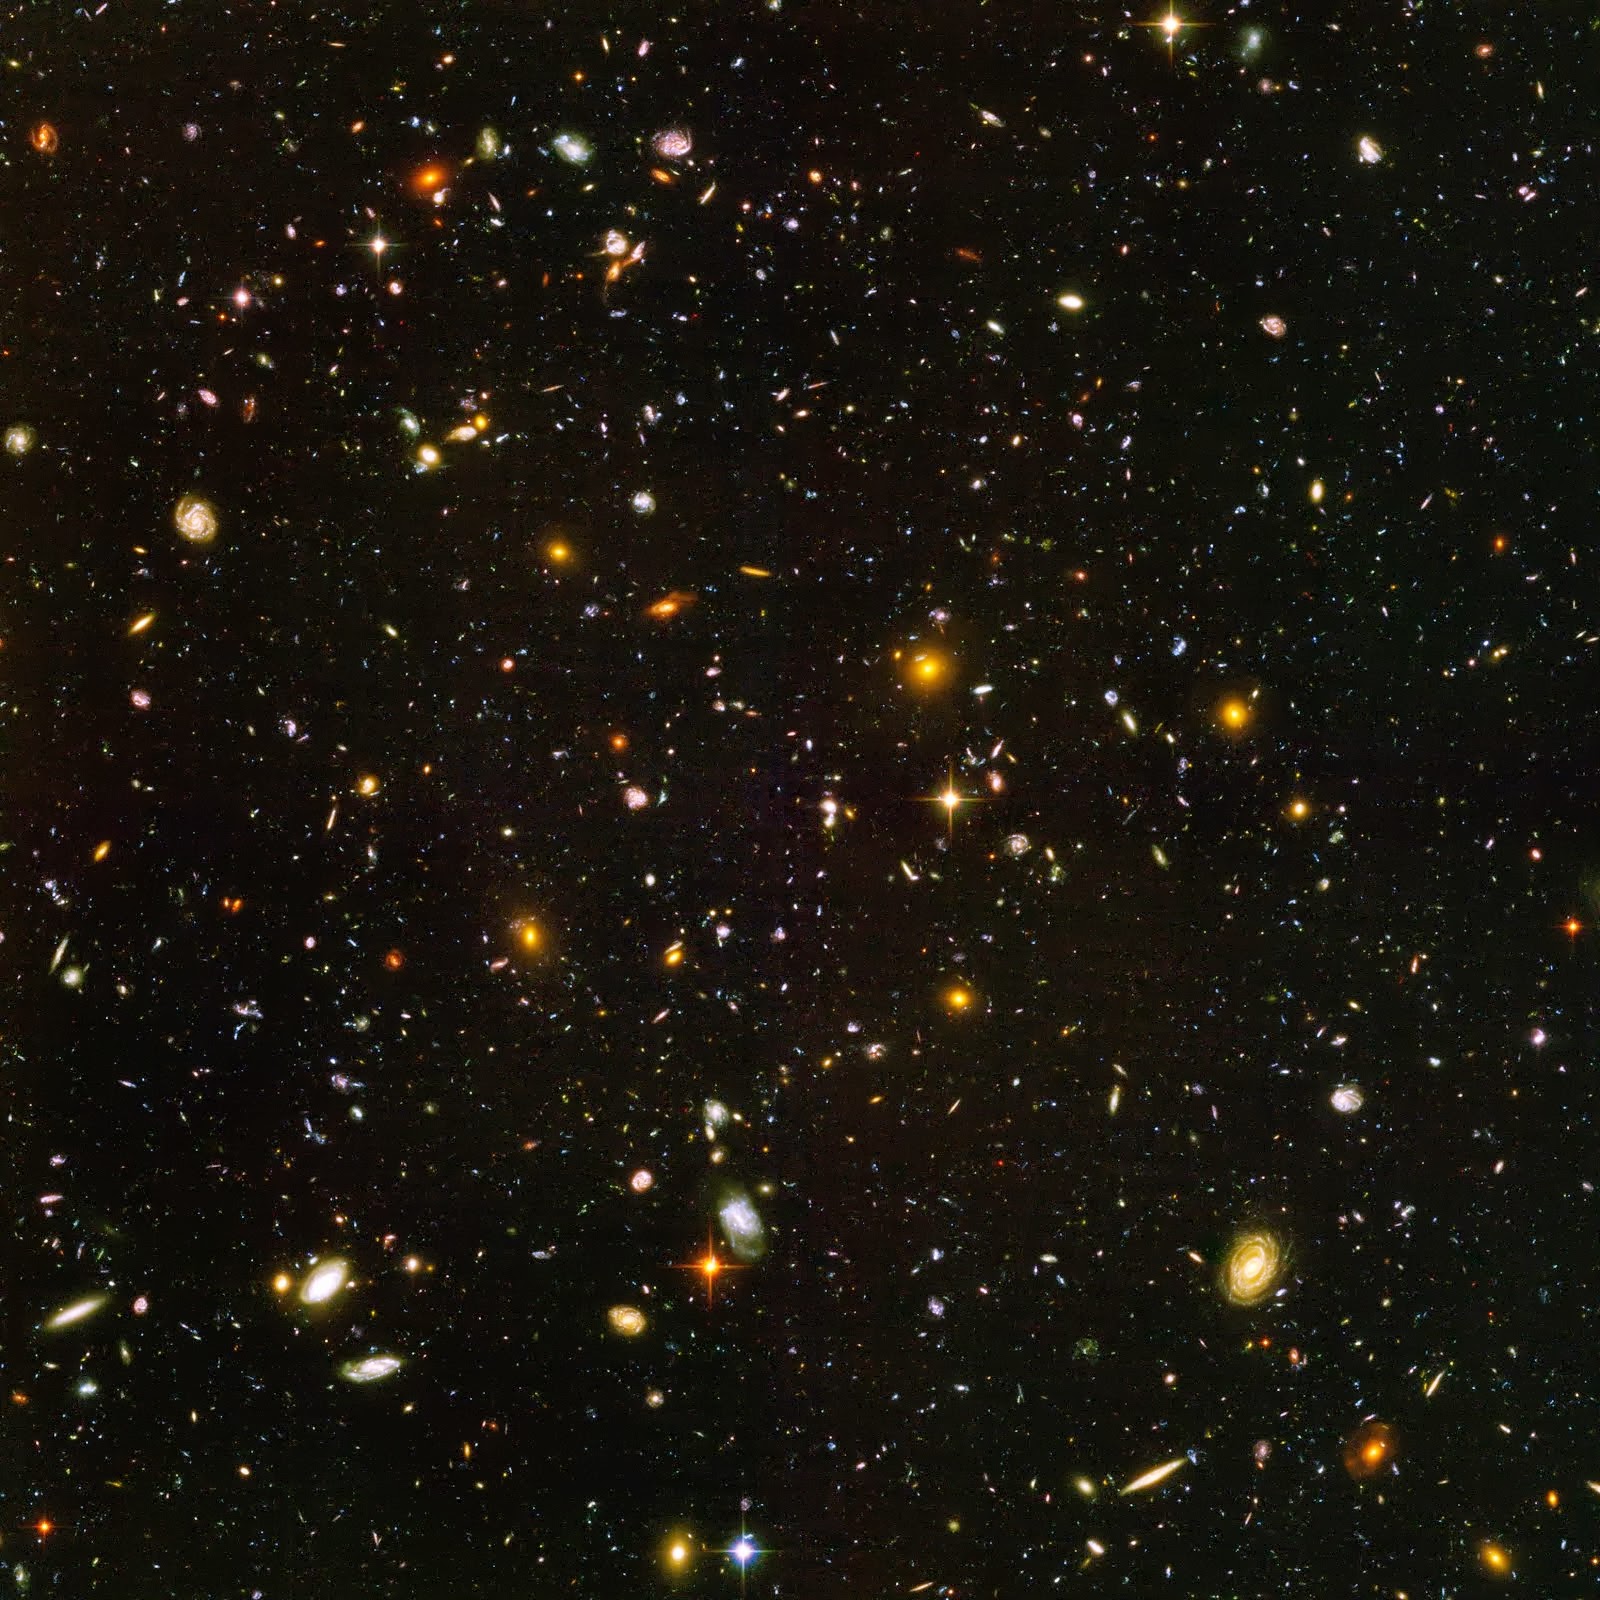 Hubble Deep Space Image In High Resolution For